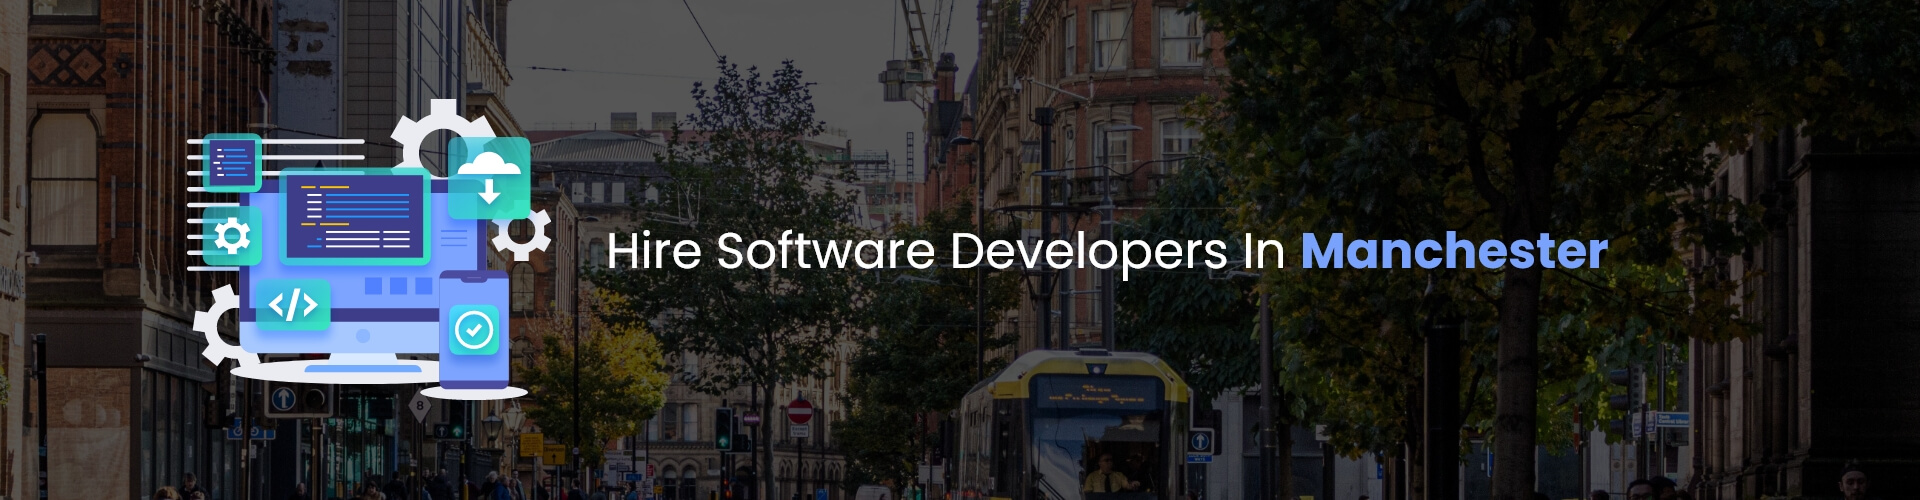 hire software developers in manchester